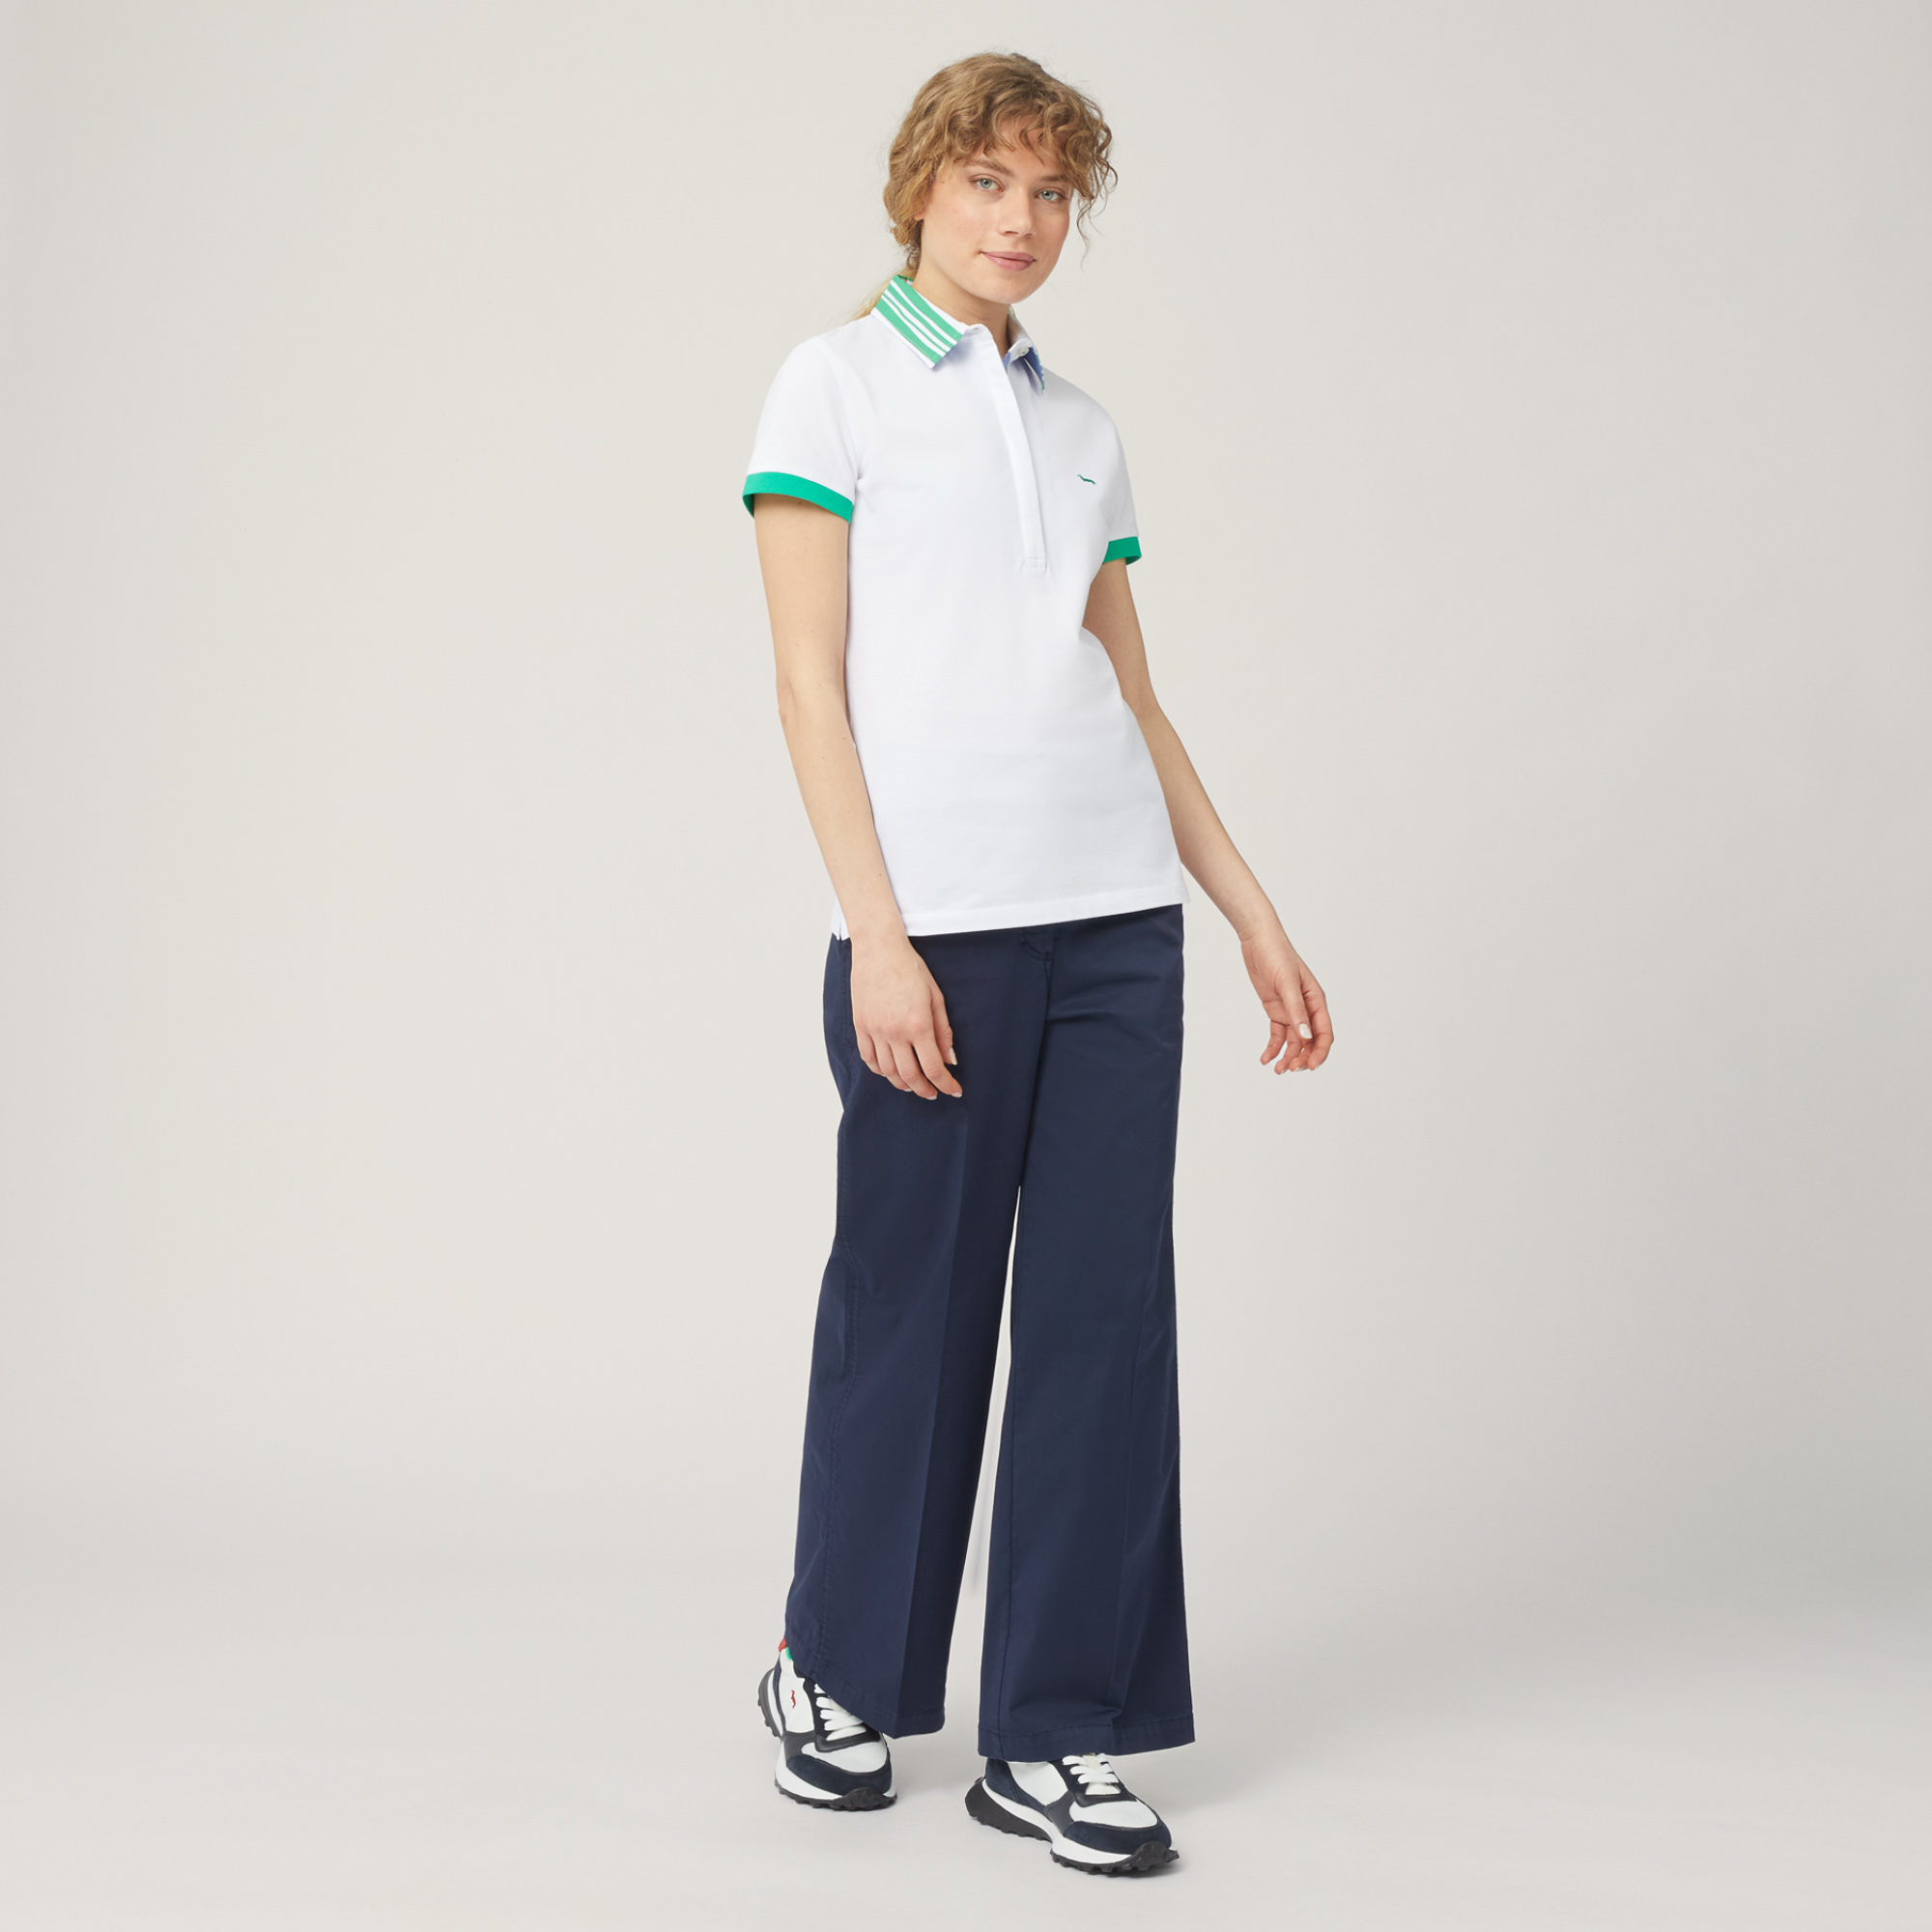 Vietri Polo Shirt with Printed Collar, White, large image number 3